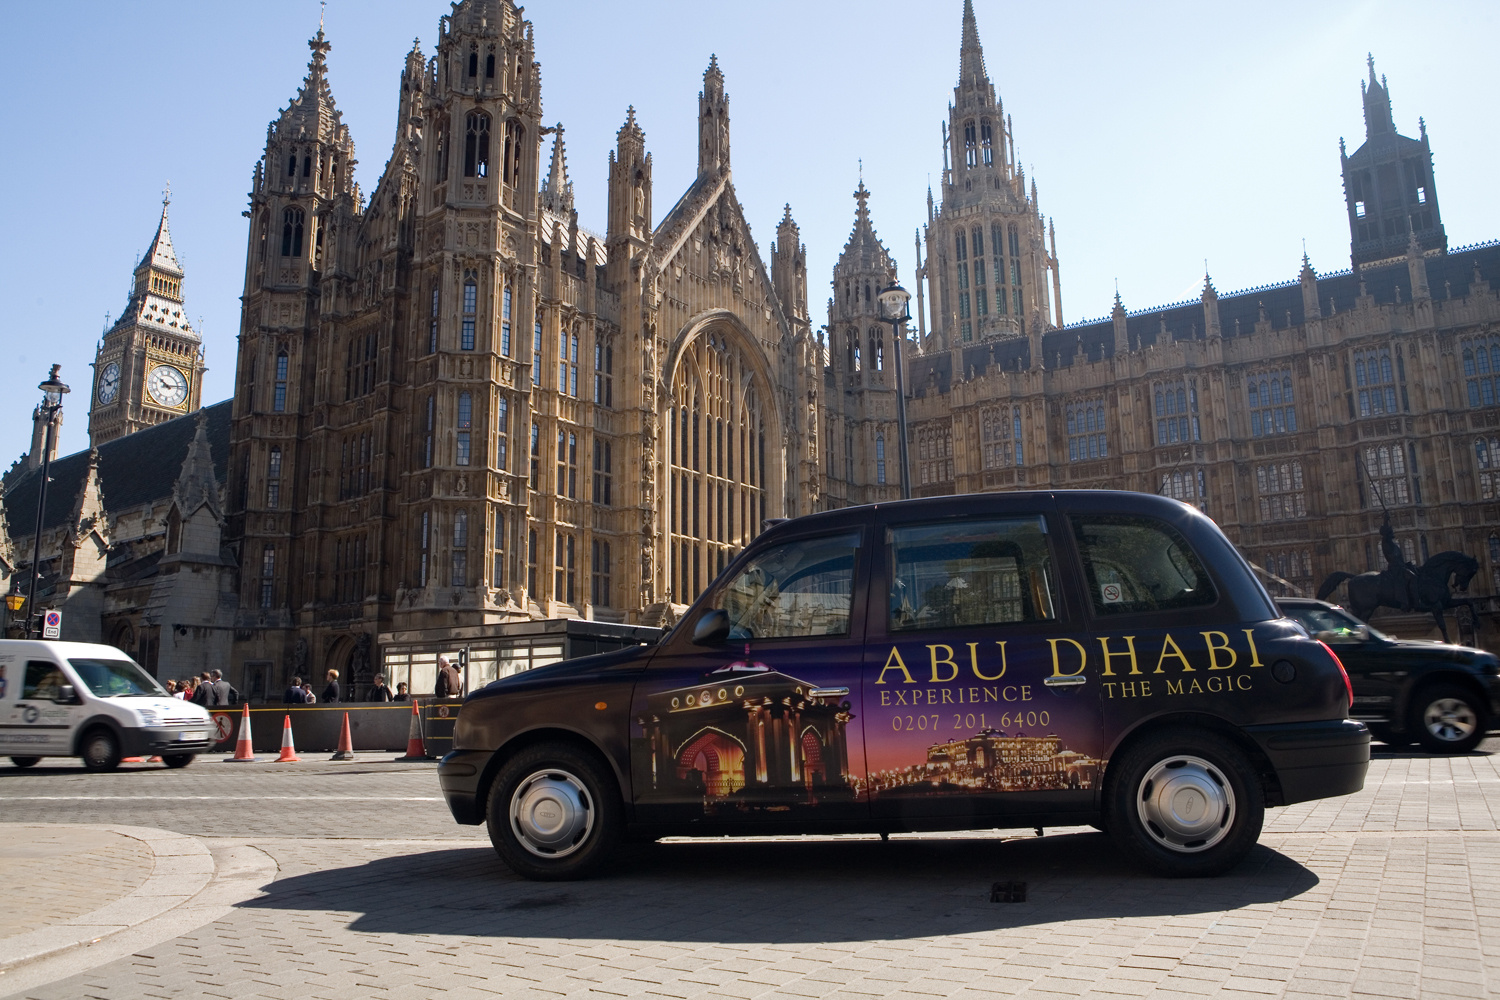 2006 Ubiquitous taxi advertising campaign for Abu Dhabi - Experience the magic